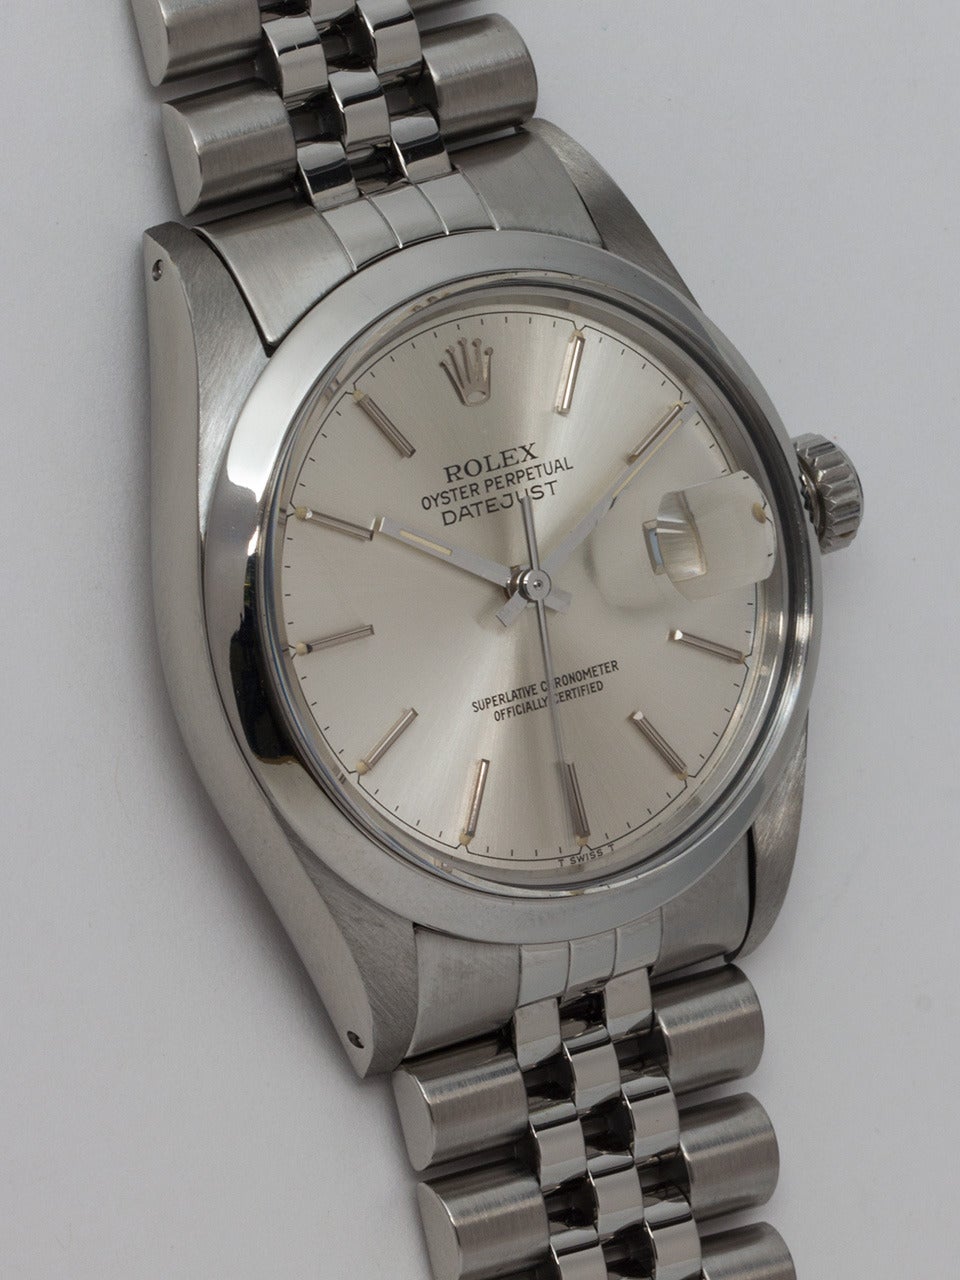 Rolex Stainless Steel Datejust Wristwatch, Ref. 16030, serial number 9.7 million, circa 1987. 36mm case with smooth bezel and acrylic crystal. Unusual original silvered dial with a special minute track printed outside the luminous dots. Powered by a